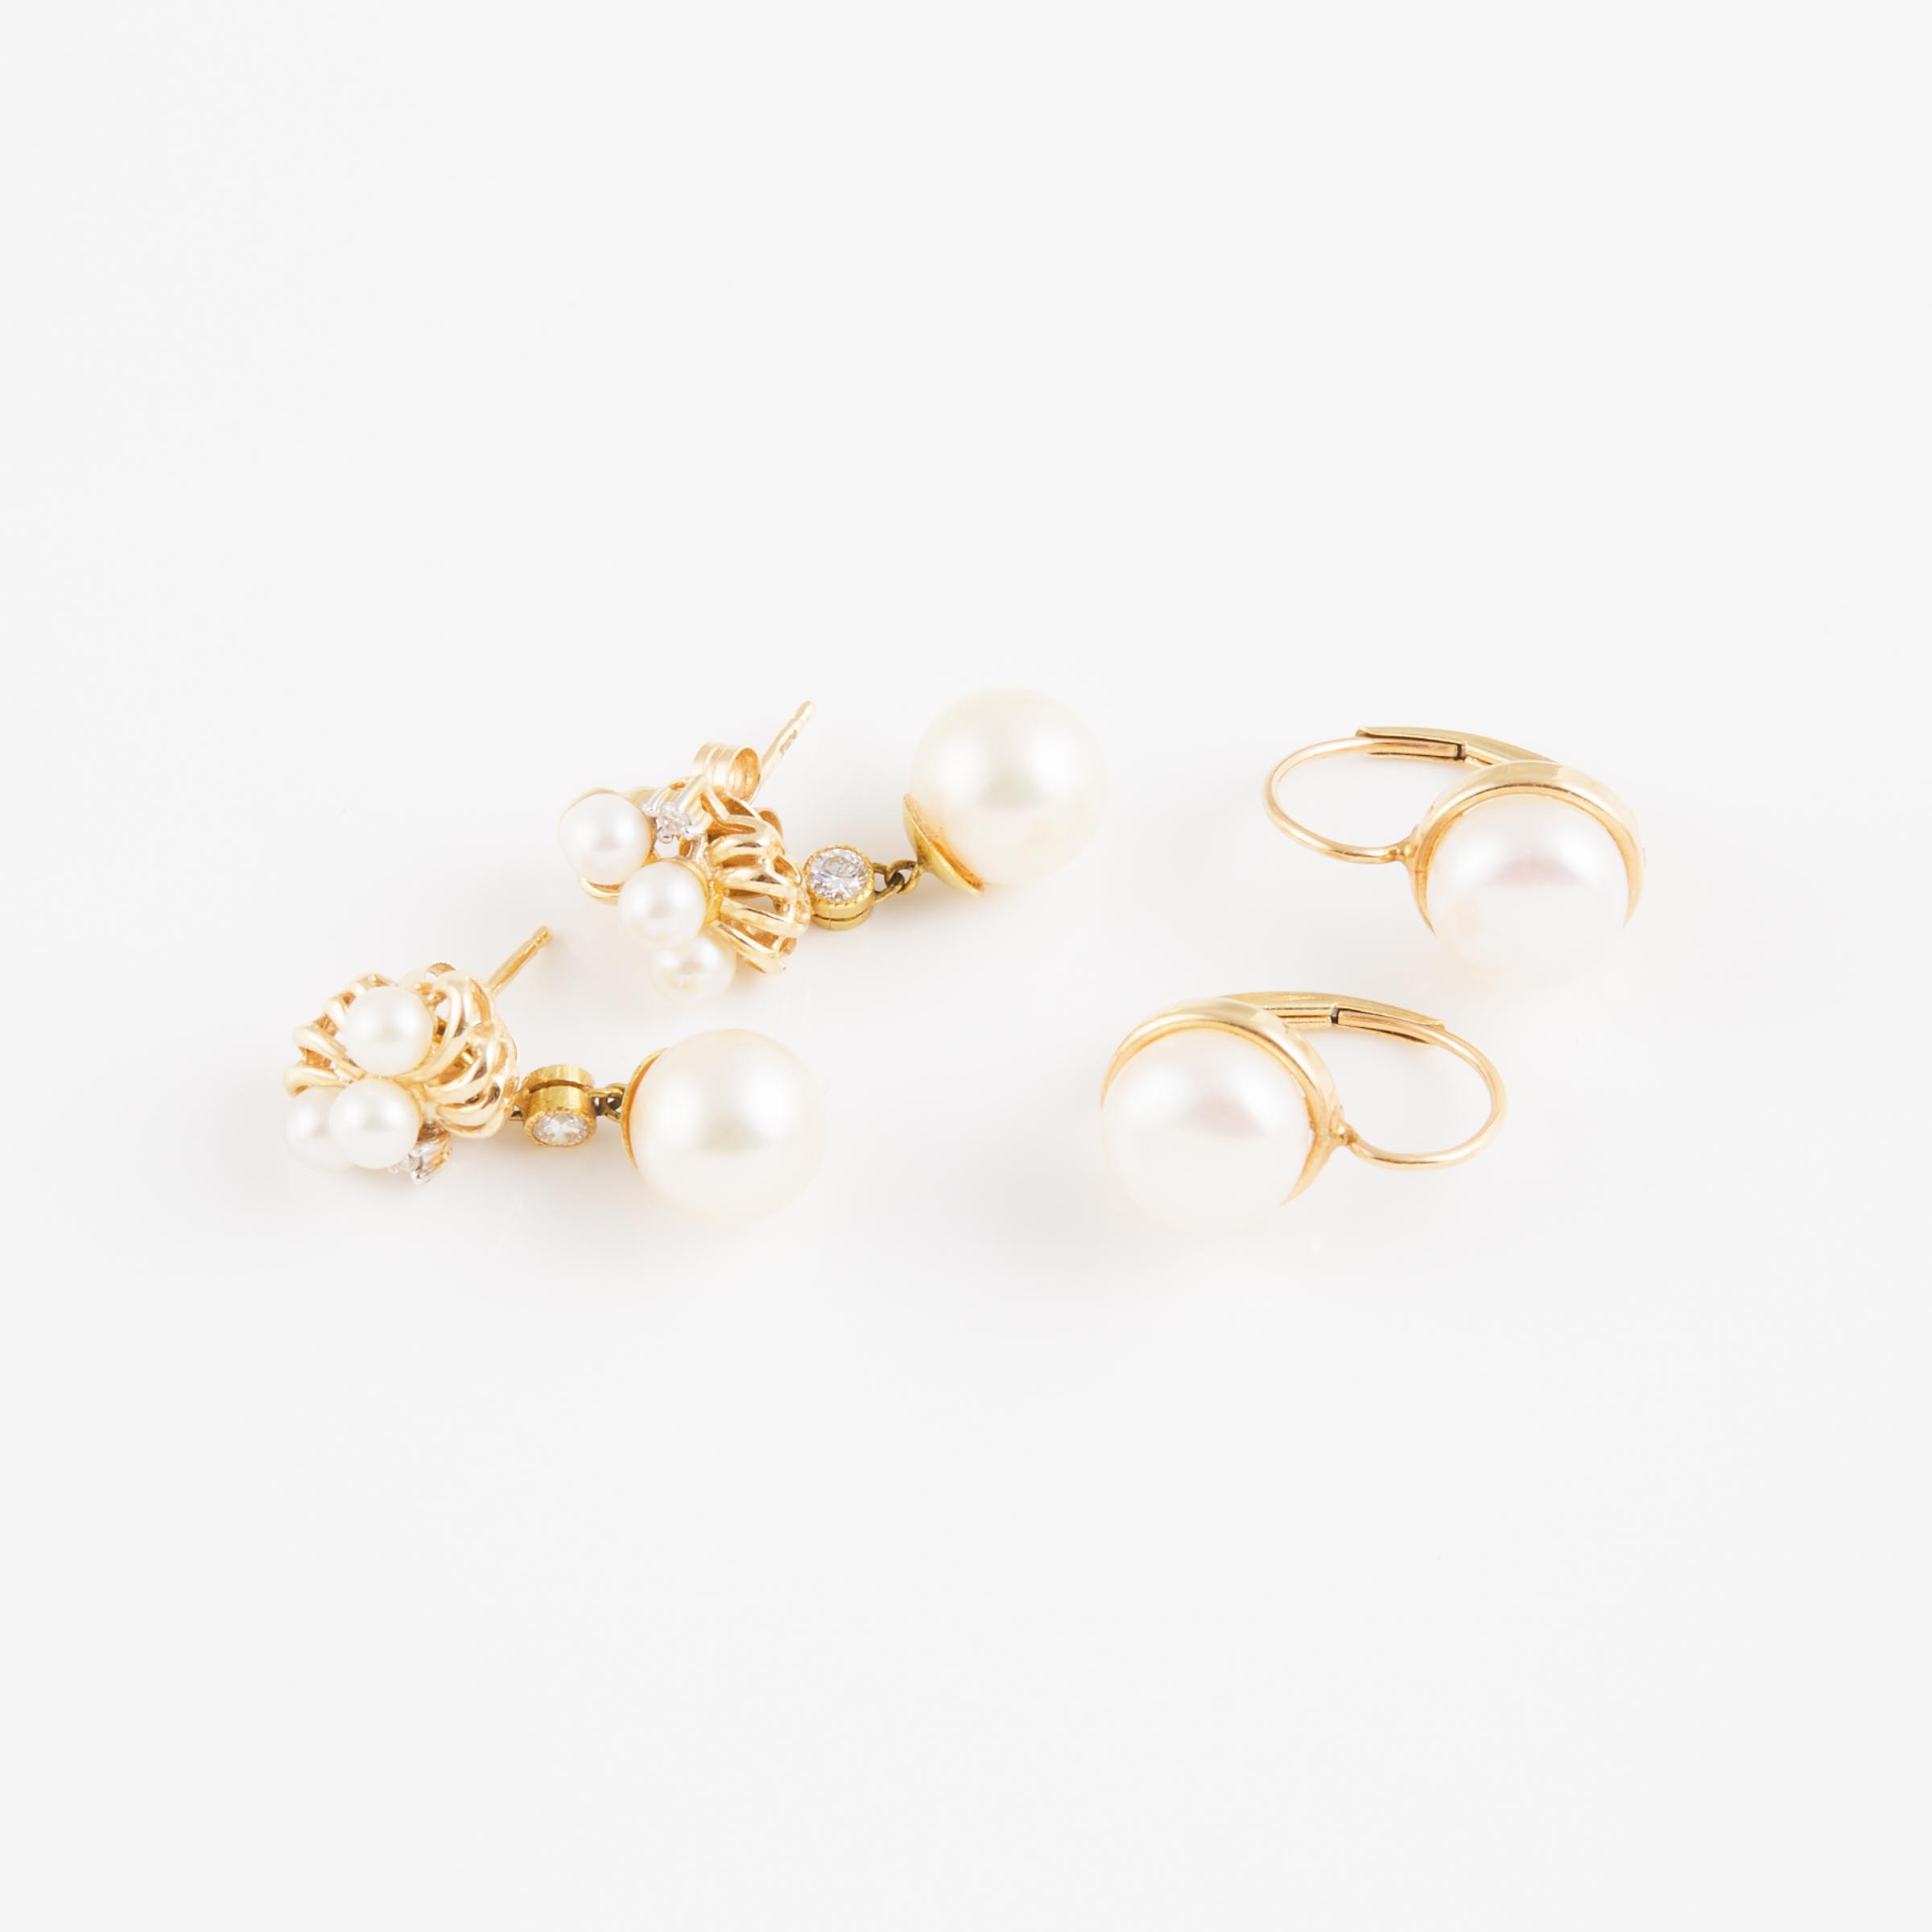 2 Pairs Of 14k Yellow Gold And Pearl Earrings